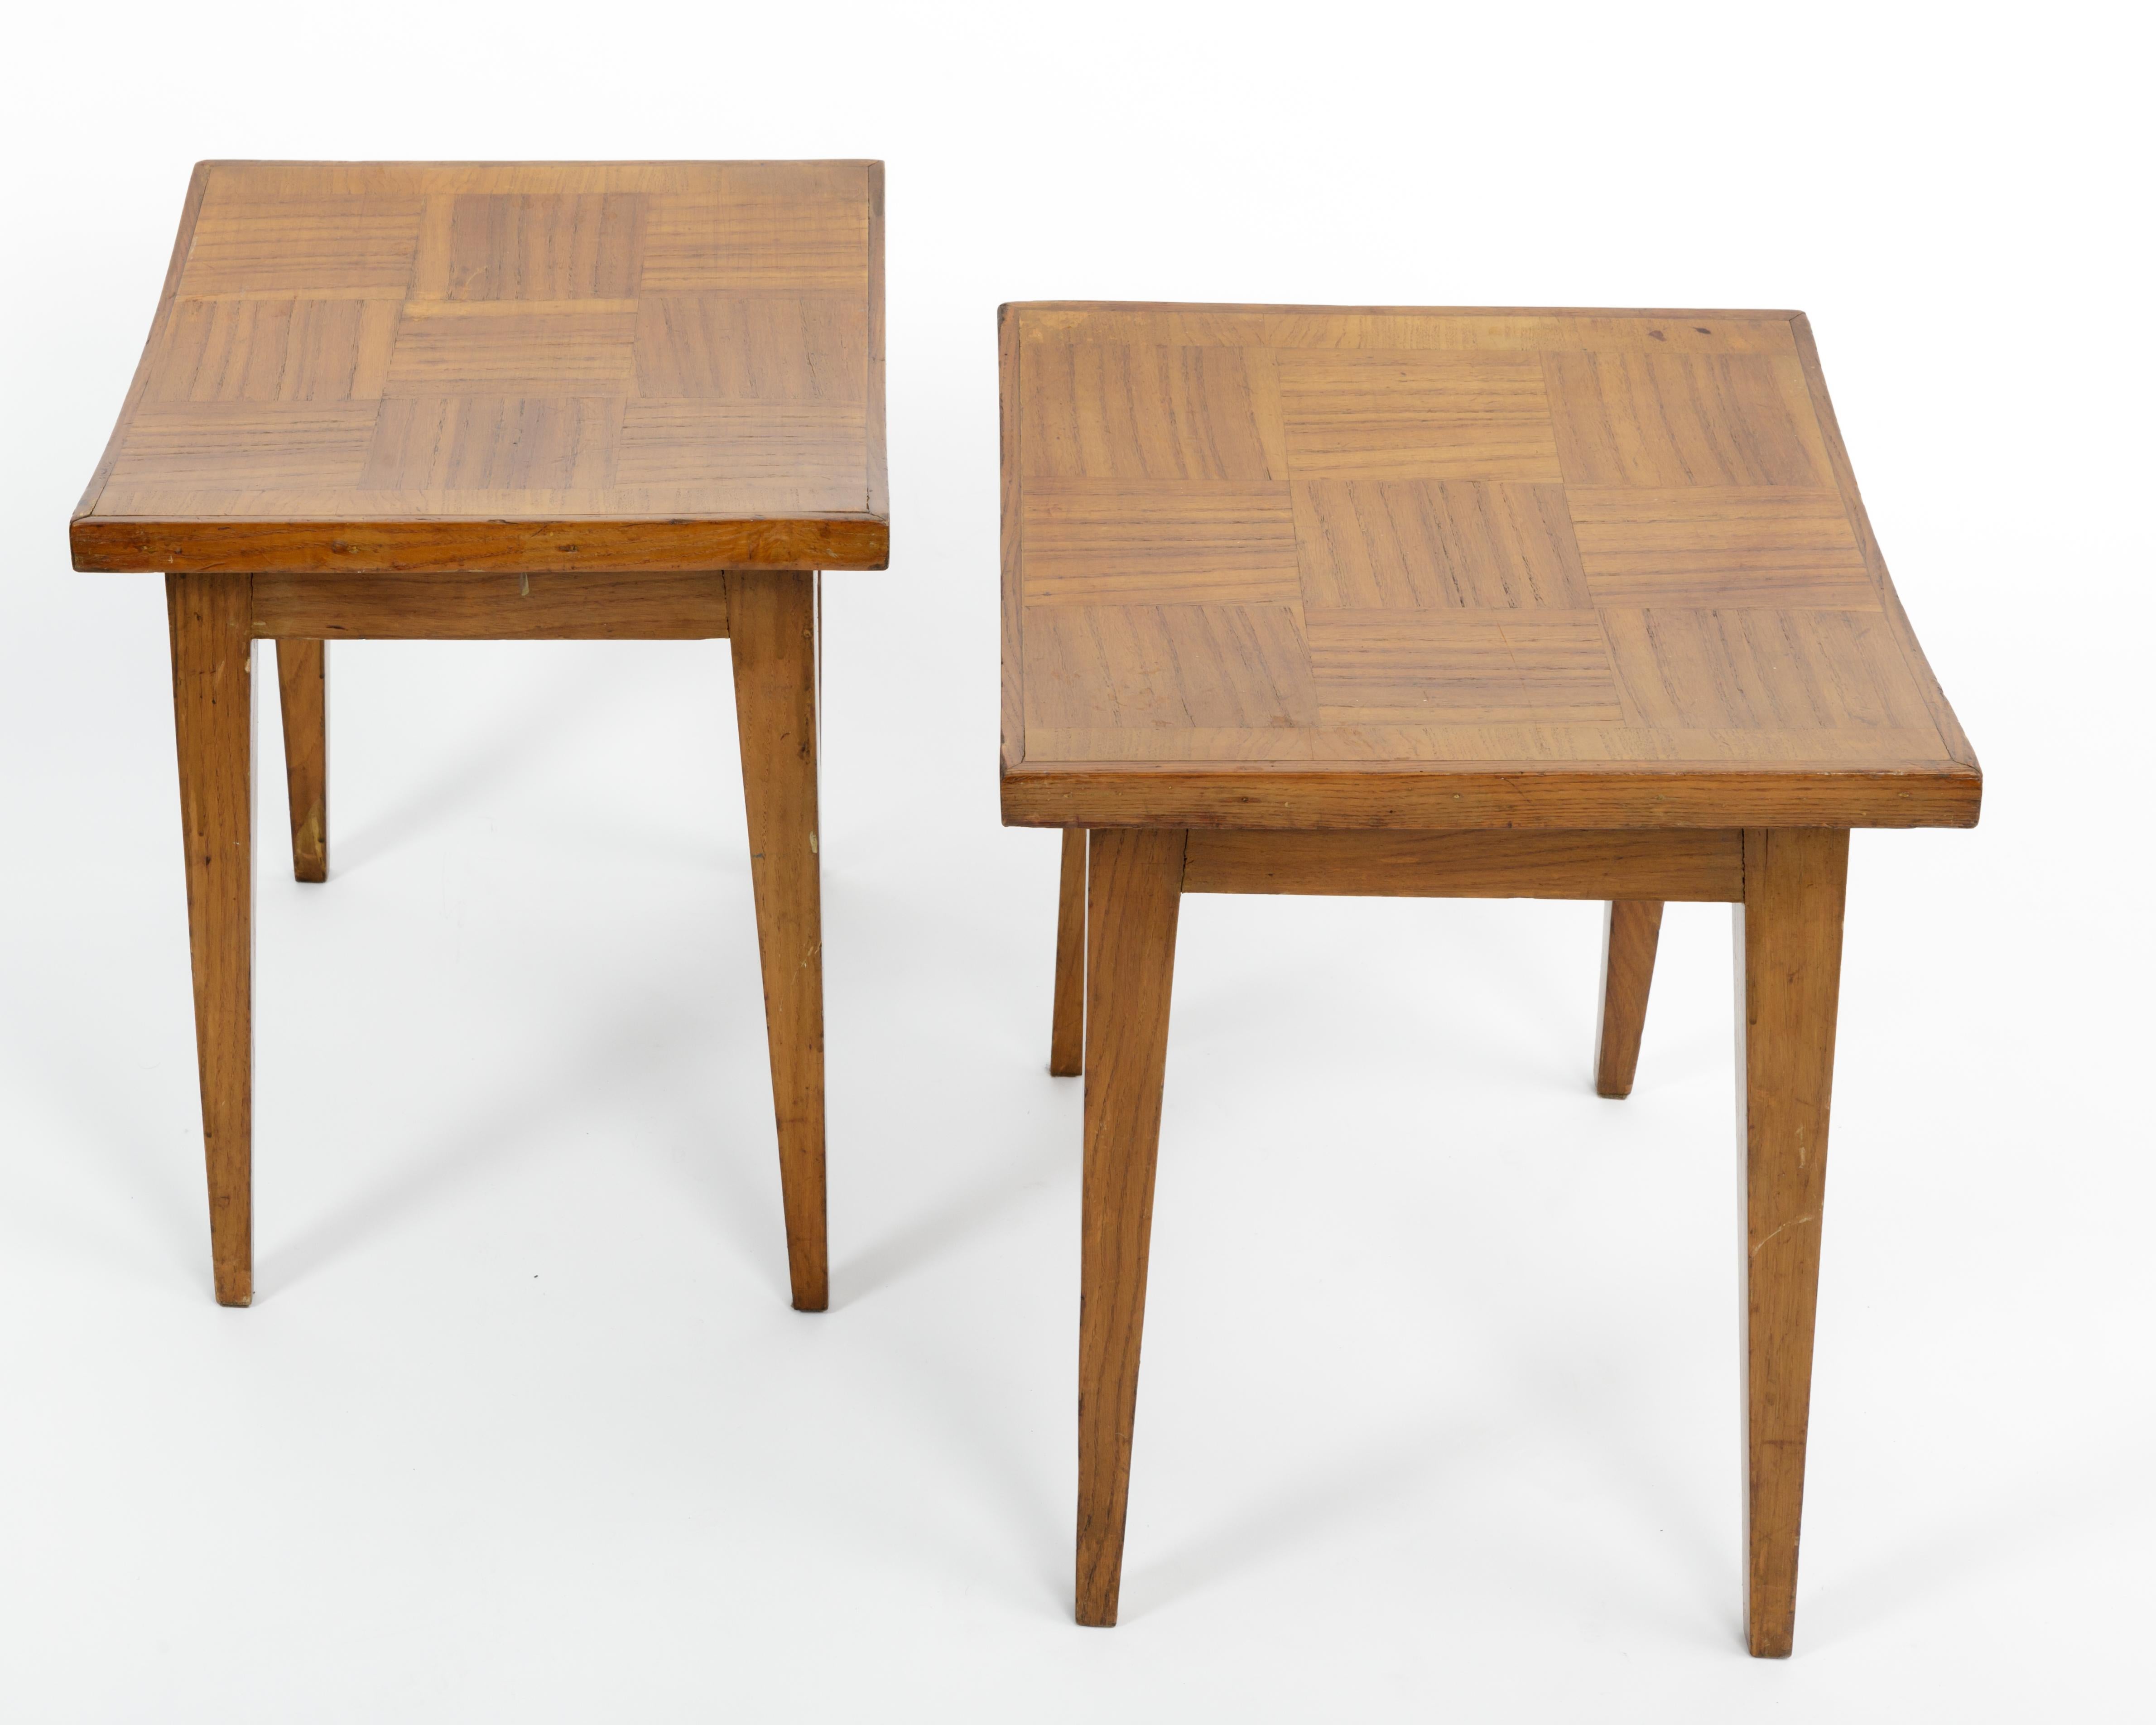 20th Century Modernist Wood Stool Attributed to Gio Ponti, Italy, c. 1950s For Sale